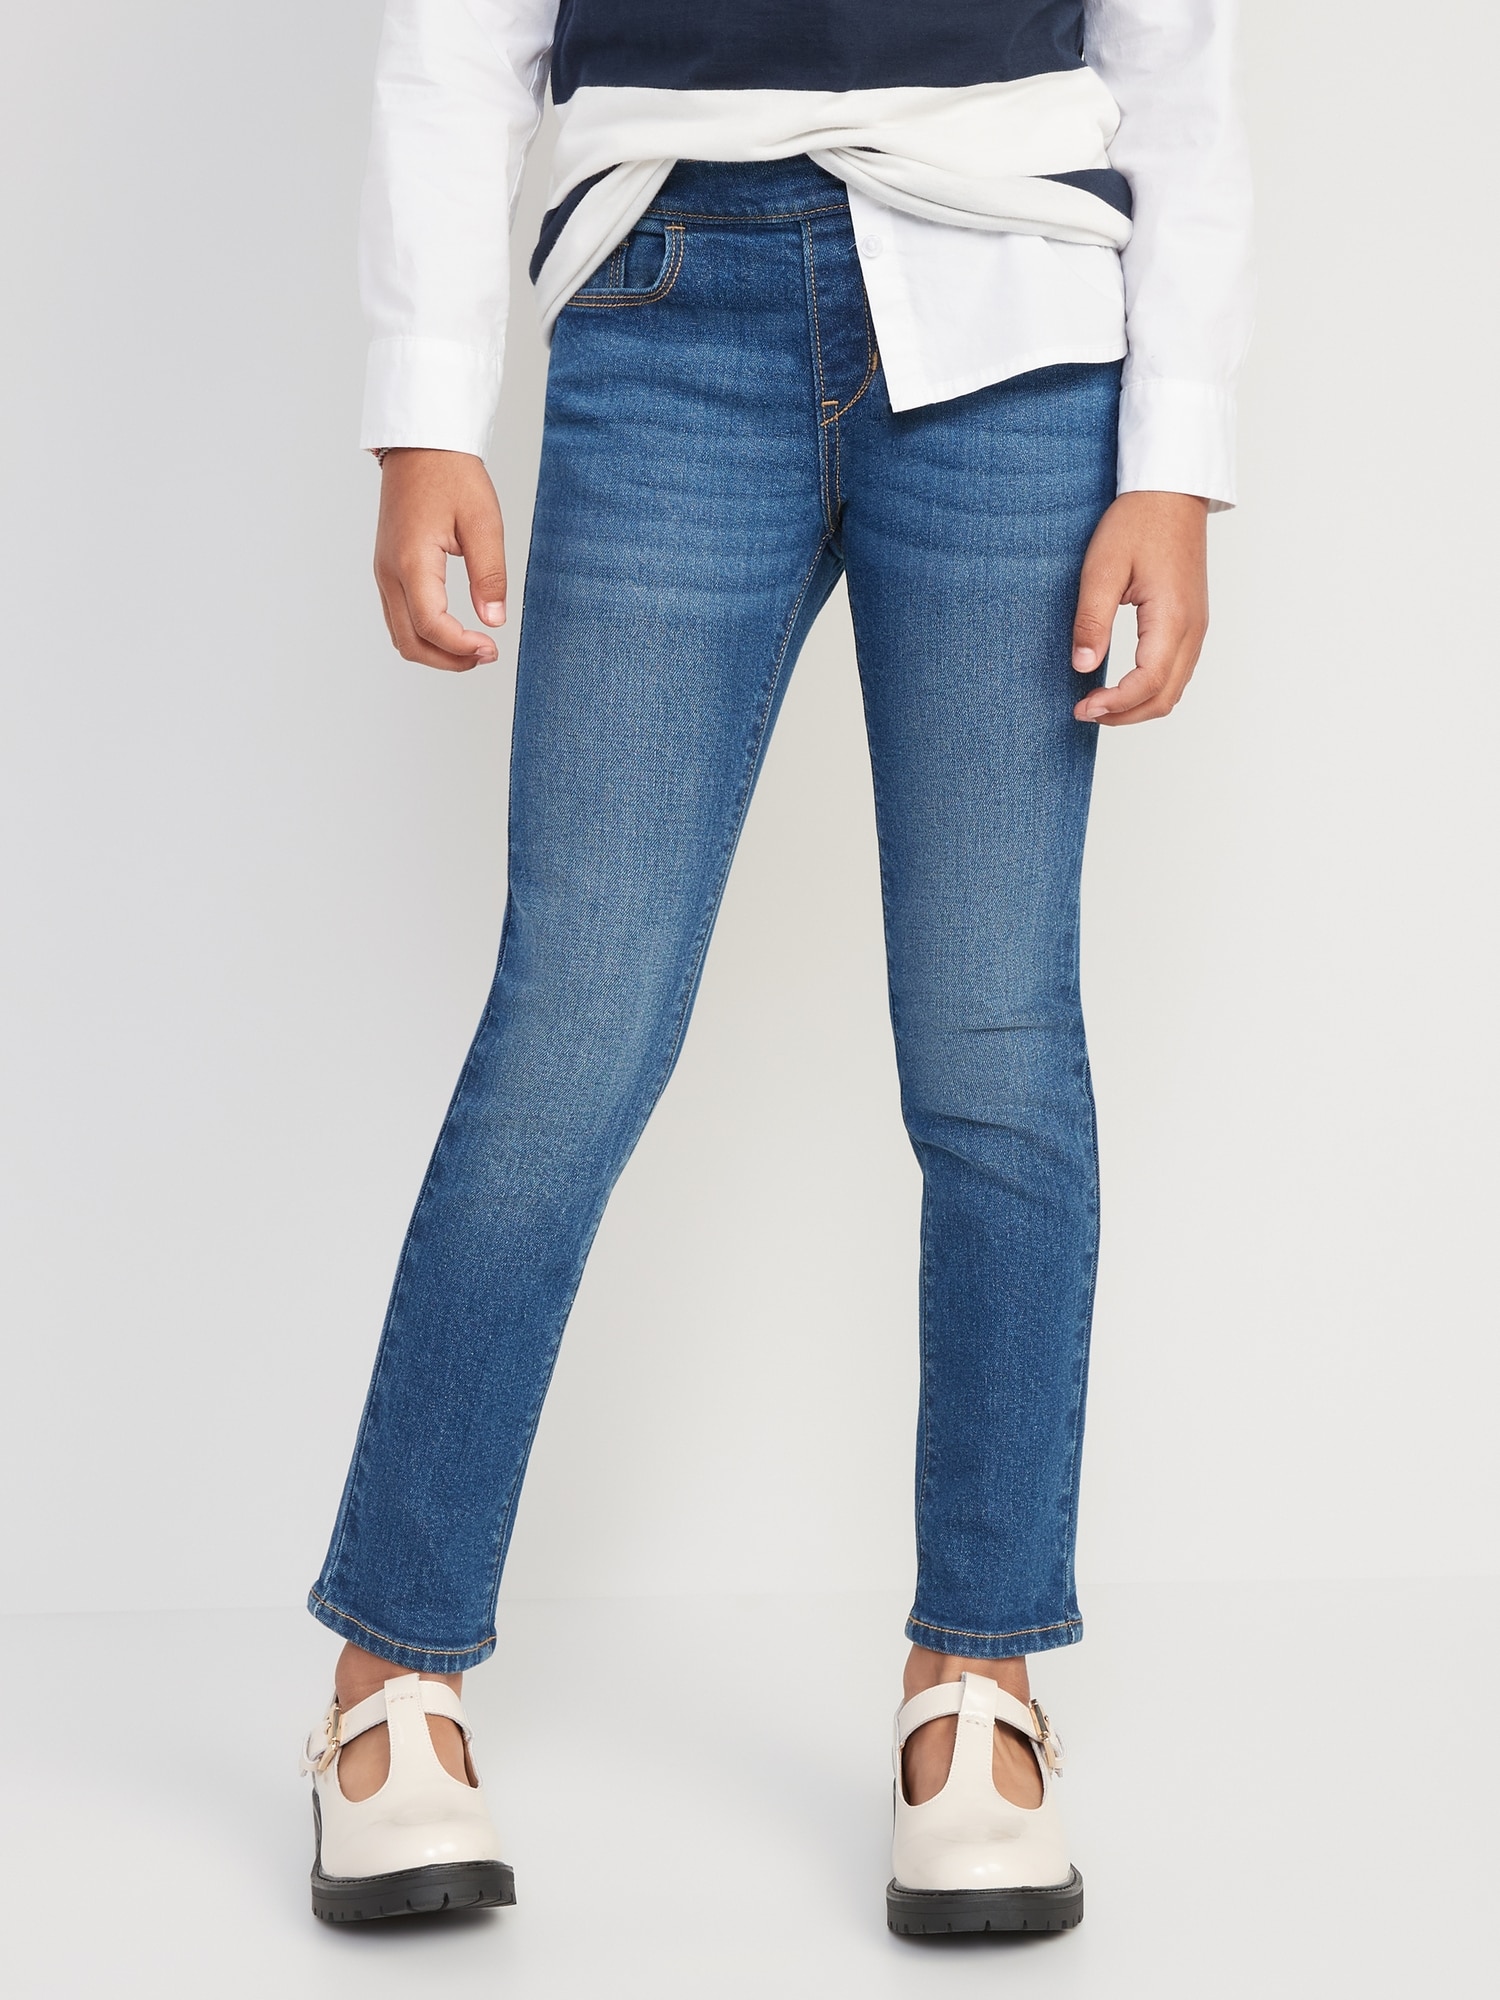 Wow Skinny Pull-On Jeans for Girls On Sale At Old Navy